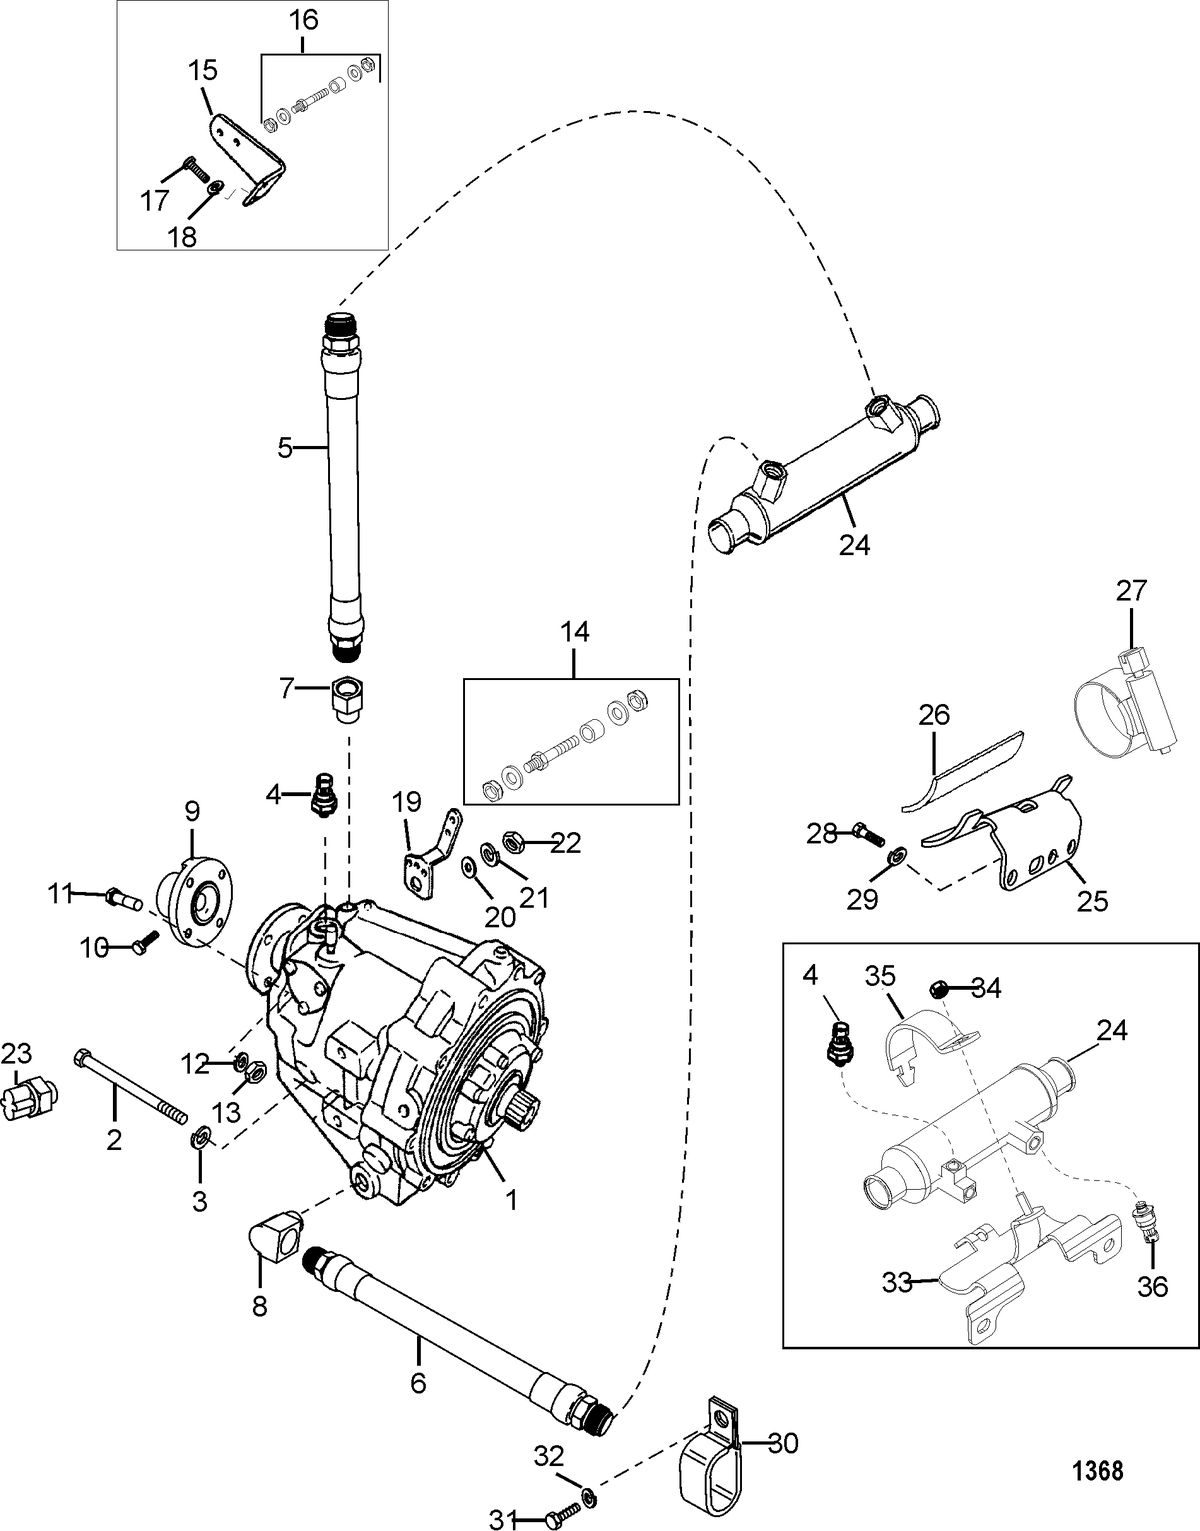 MERCRUISER 5.7/6.2L MPI INBOARD EC Transmission and Related Parts(BORG-WARNER 71C and 72C)